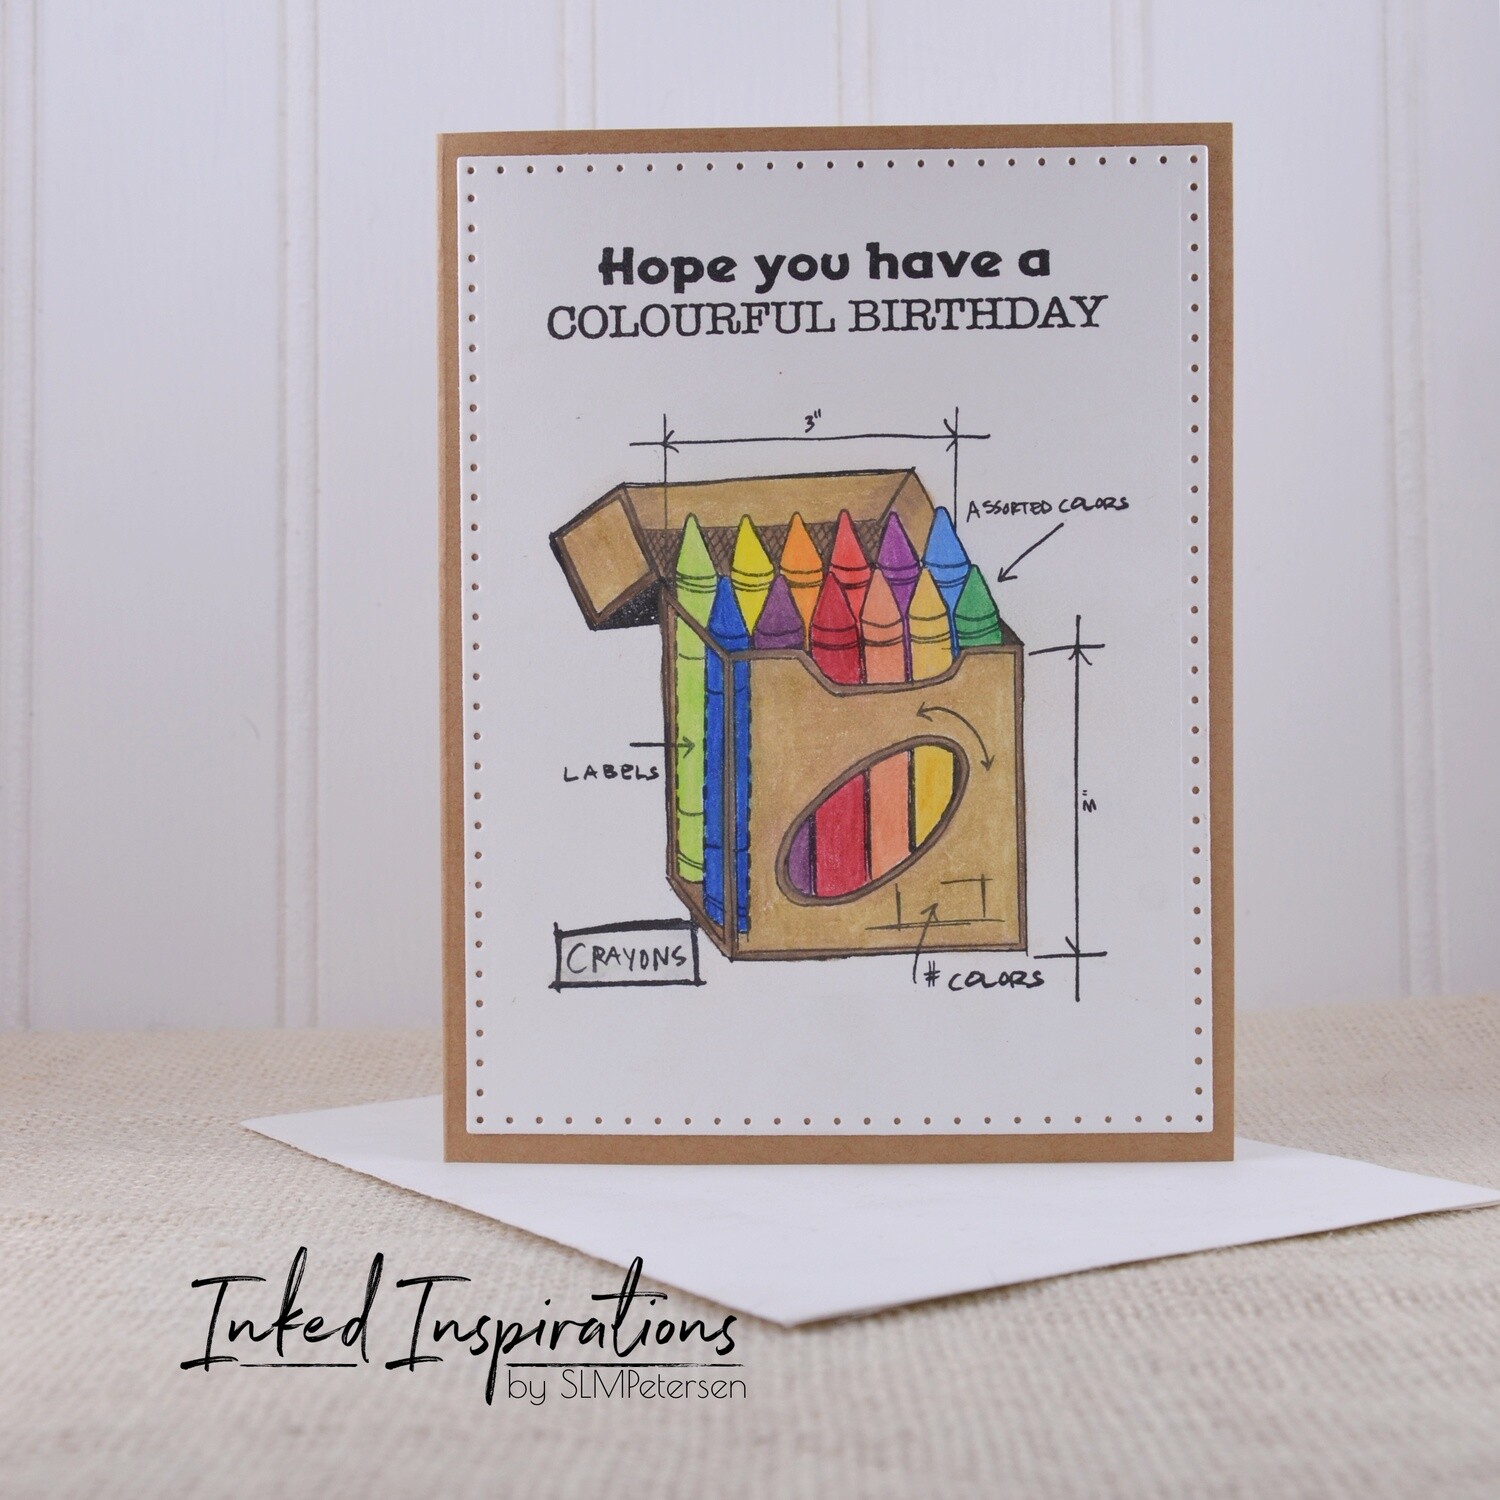 Hope You Have a Colorful Birthday - Box of Crayons #2